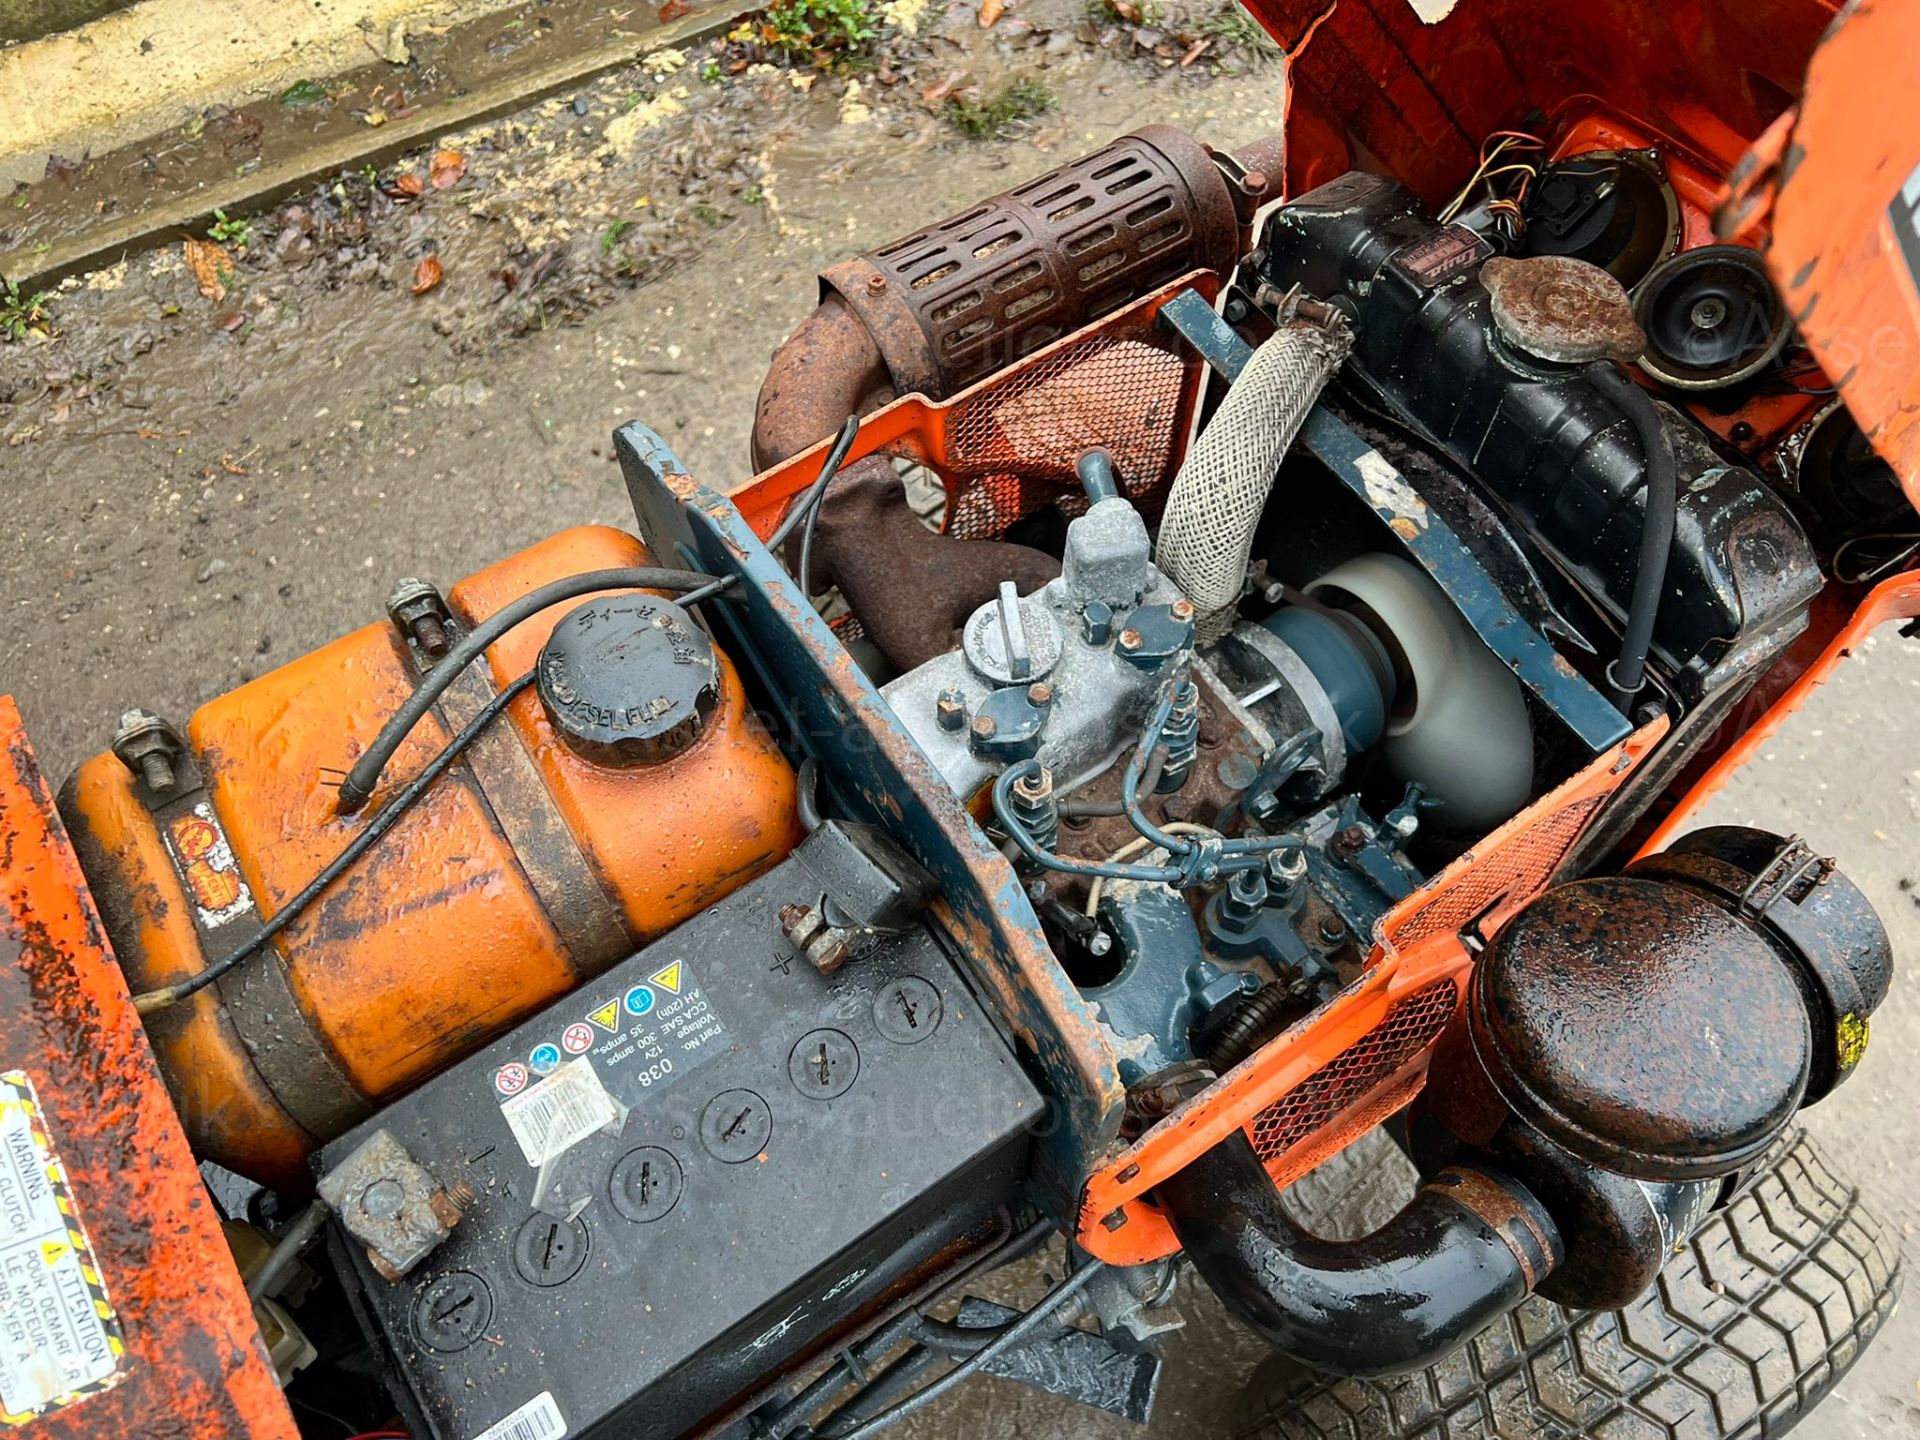 KUBOTA B5100E 15hp COMPACT TRACTOR, RUNS DRIVES AND WORKS, GRASS TYRES *PLUS VAT* - Image 9 of 9